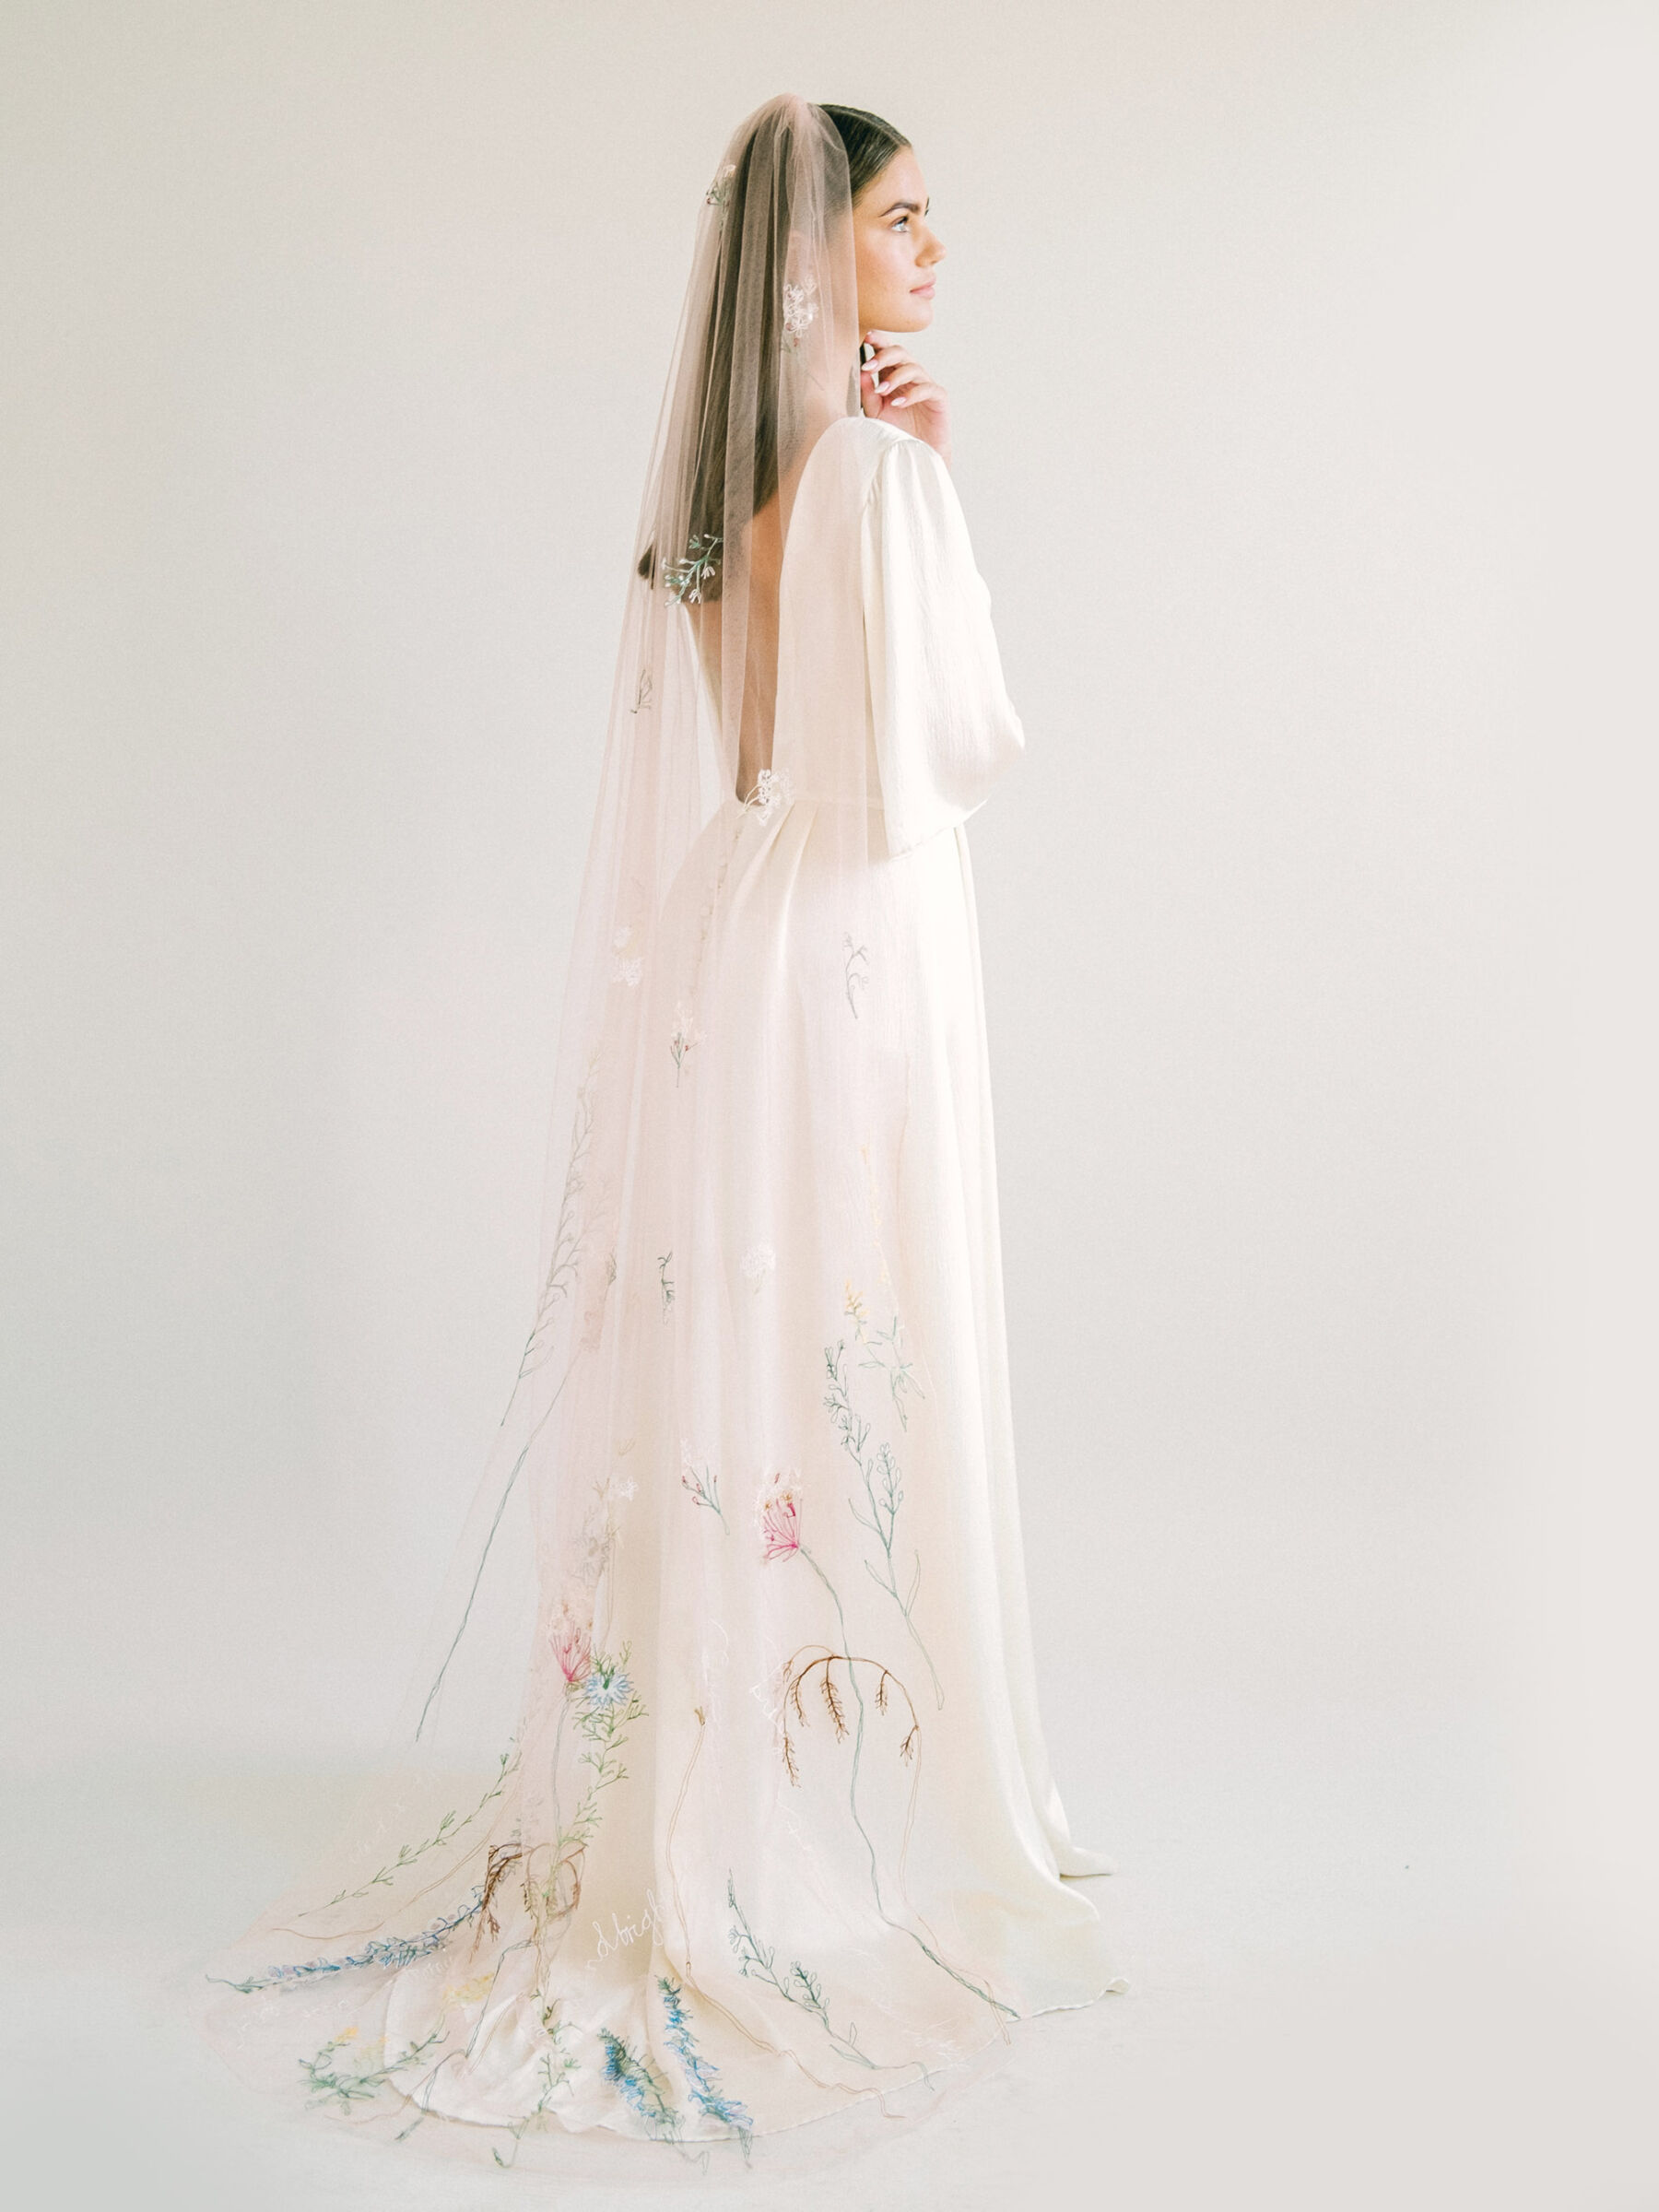 Bride standing with her back to the camera, wearing a low-back dress by Kate Beaumont & chapel length, long wedding veil with floral embroidery by Daisy Sheldon.